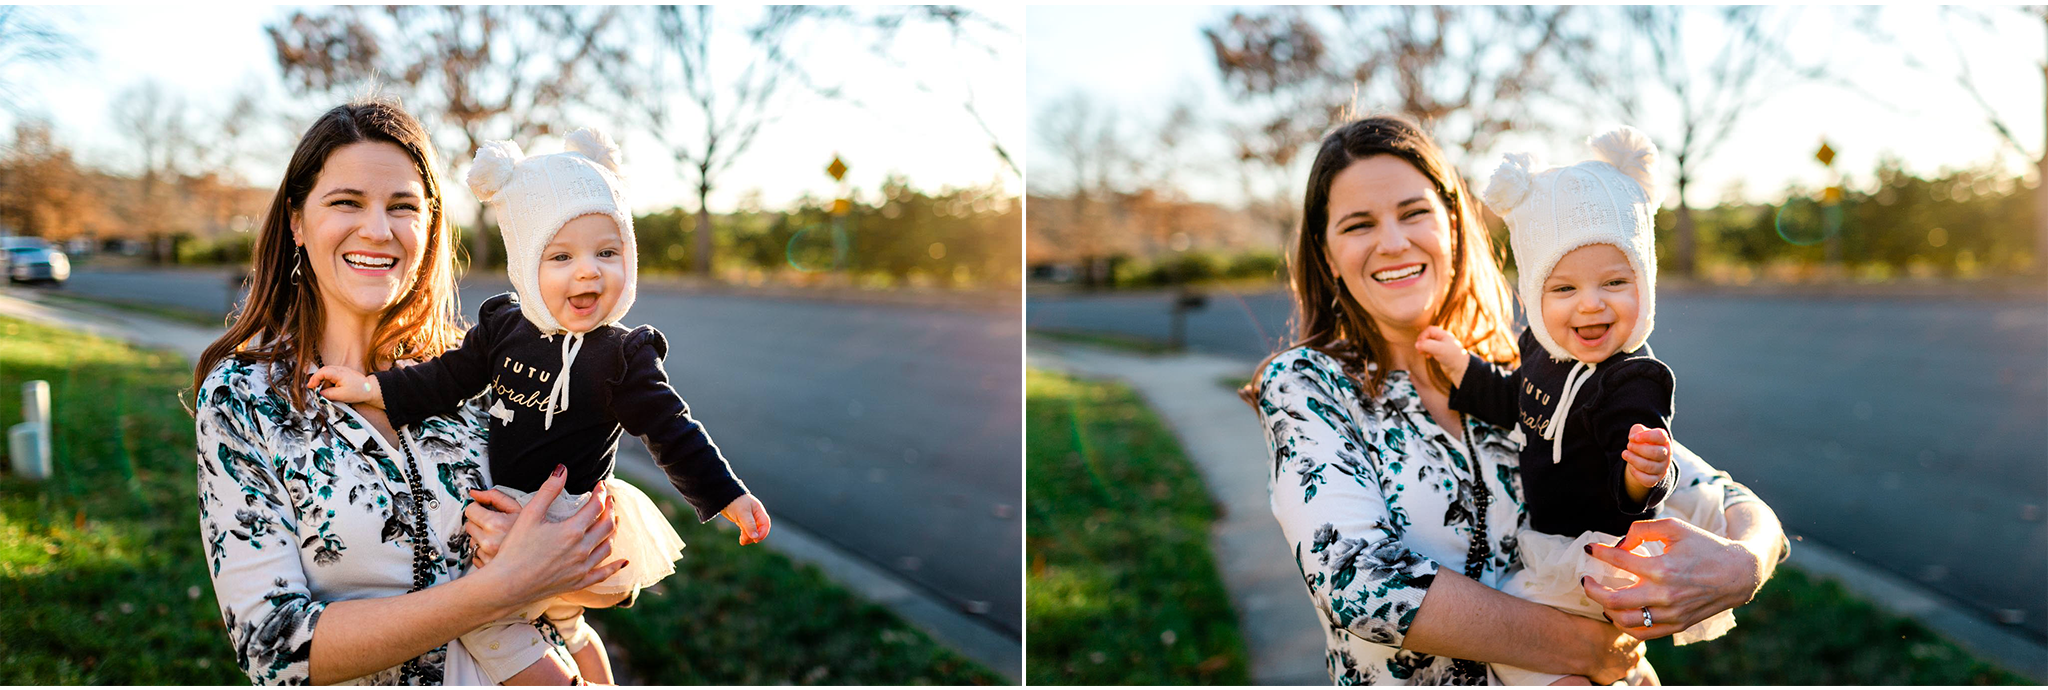 Raleigh-Family-Photographer-Blog6.png